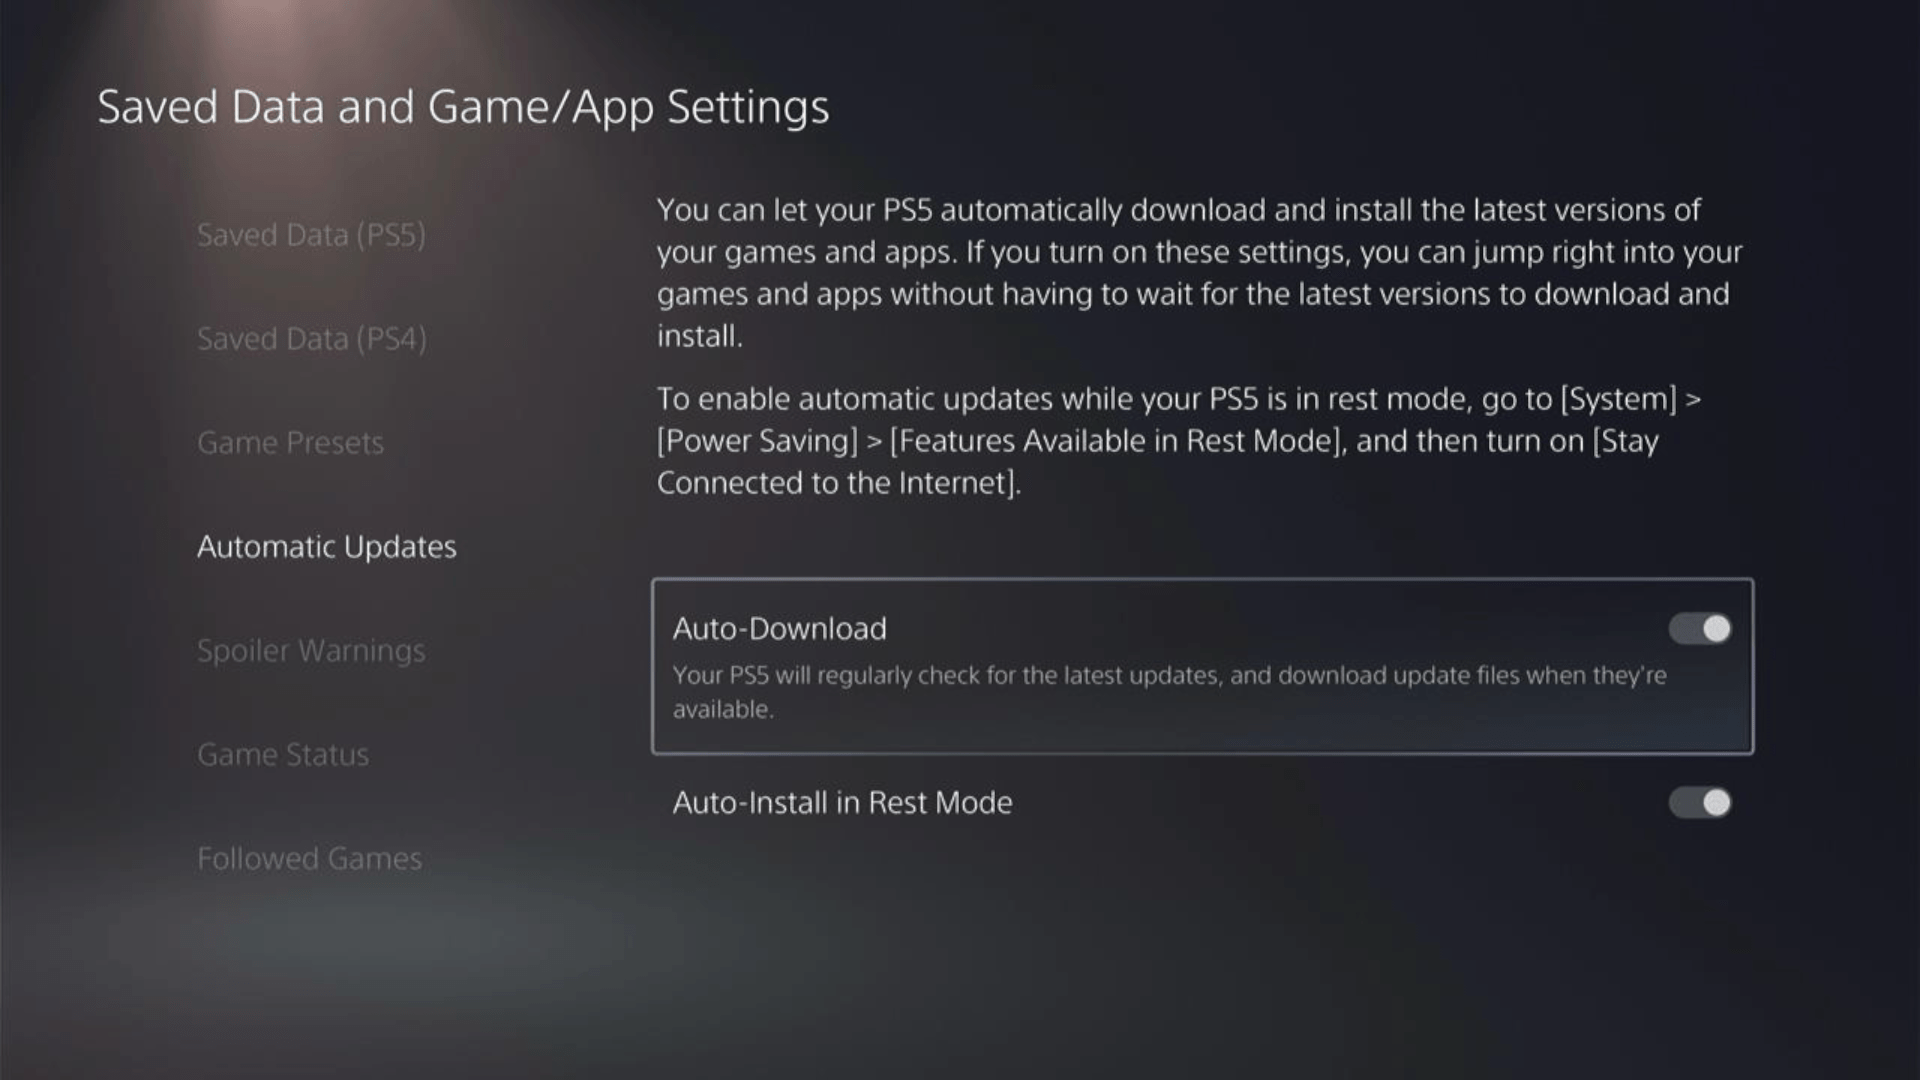 In the Saved Data and Game/App Settings window, select Automatic Updates from the left sidebar to enable automatic game updates to avoid hanging